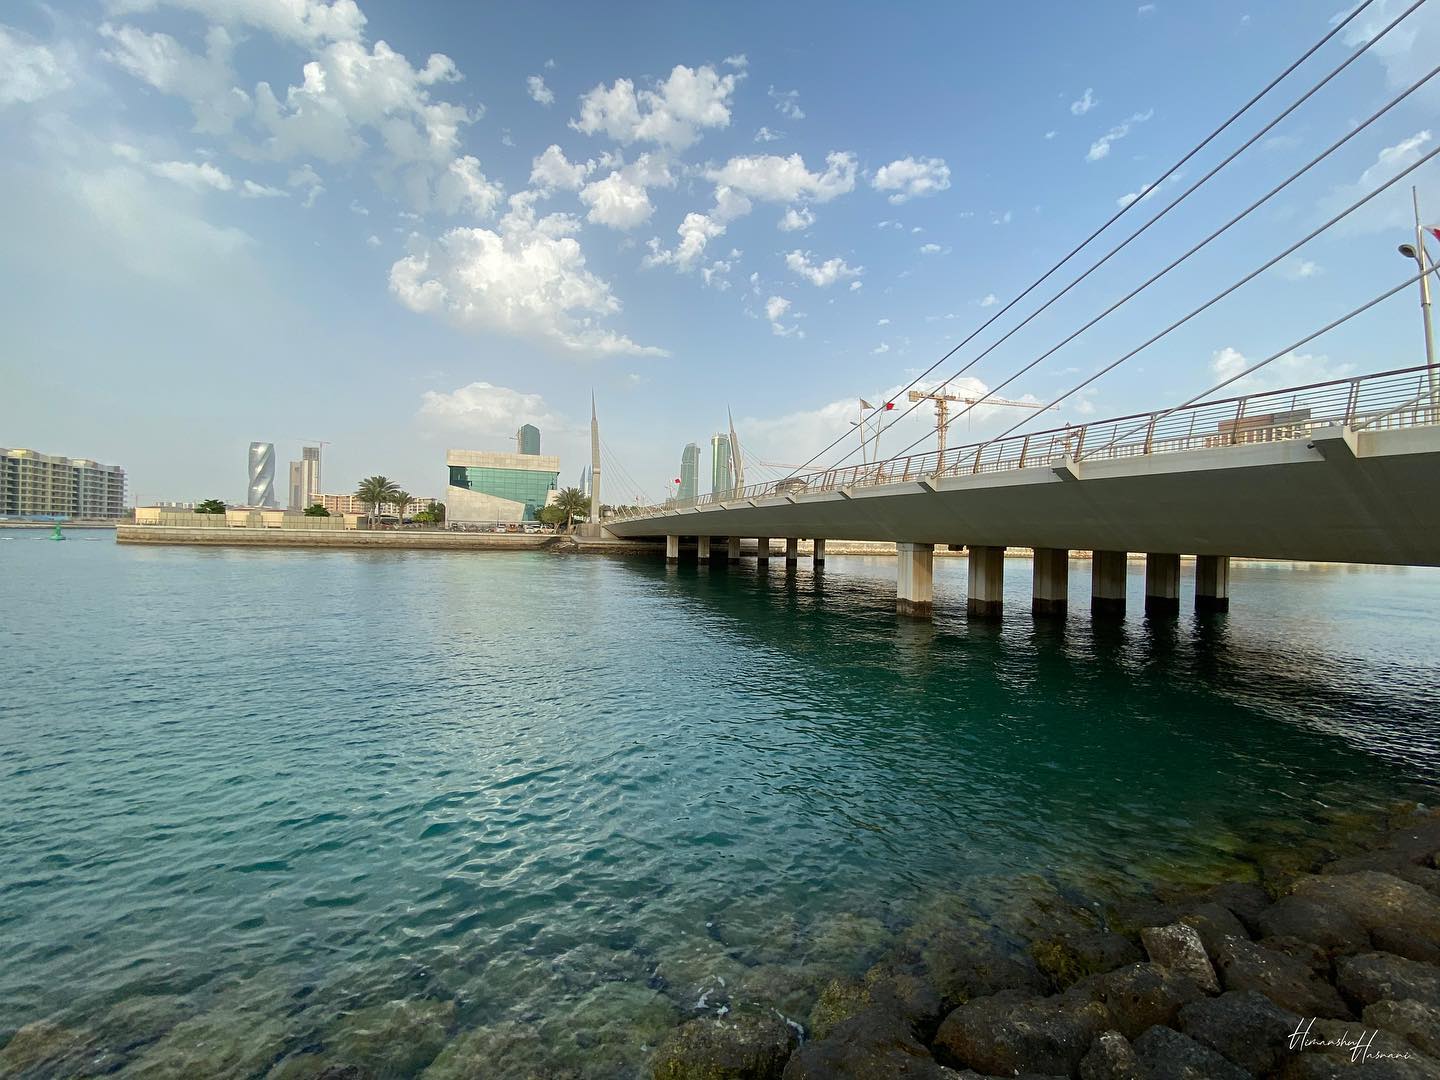 Until you cross the bridge of your insecurities, you can't begin to explore your possibilities.  
.
.
.
.
.
.
.
.
.
.
.
.
.
.
.
.
.
.
.
.
.
#nature #bahrain #photography #beautiful #manama #travel #instagood #love #naturephotography #photooftheday  #البحرين #picoftheday #art #summer #clouds #landscape #life #photographer  #sky #beach  #like4like #comment #architecture #bridge #building #water #reefisland #bh #raw #everydaybahrain